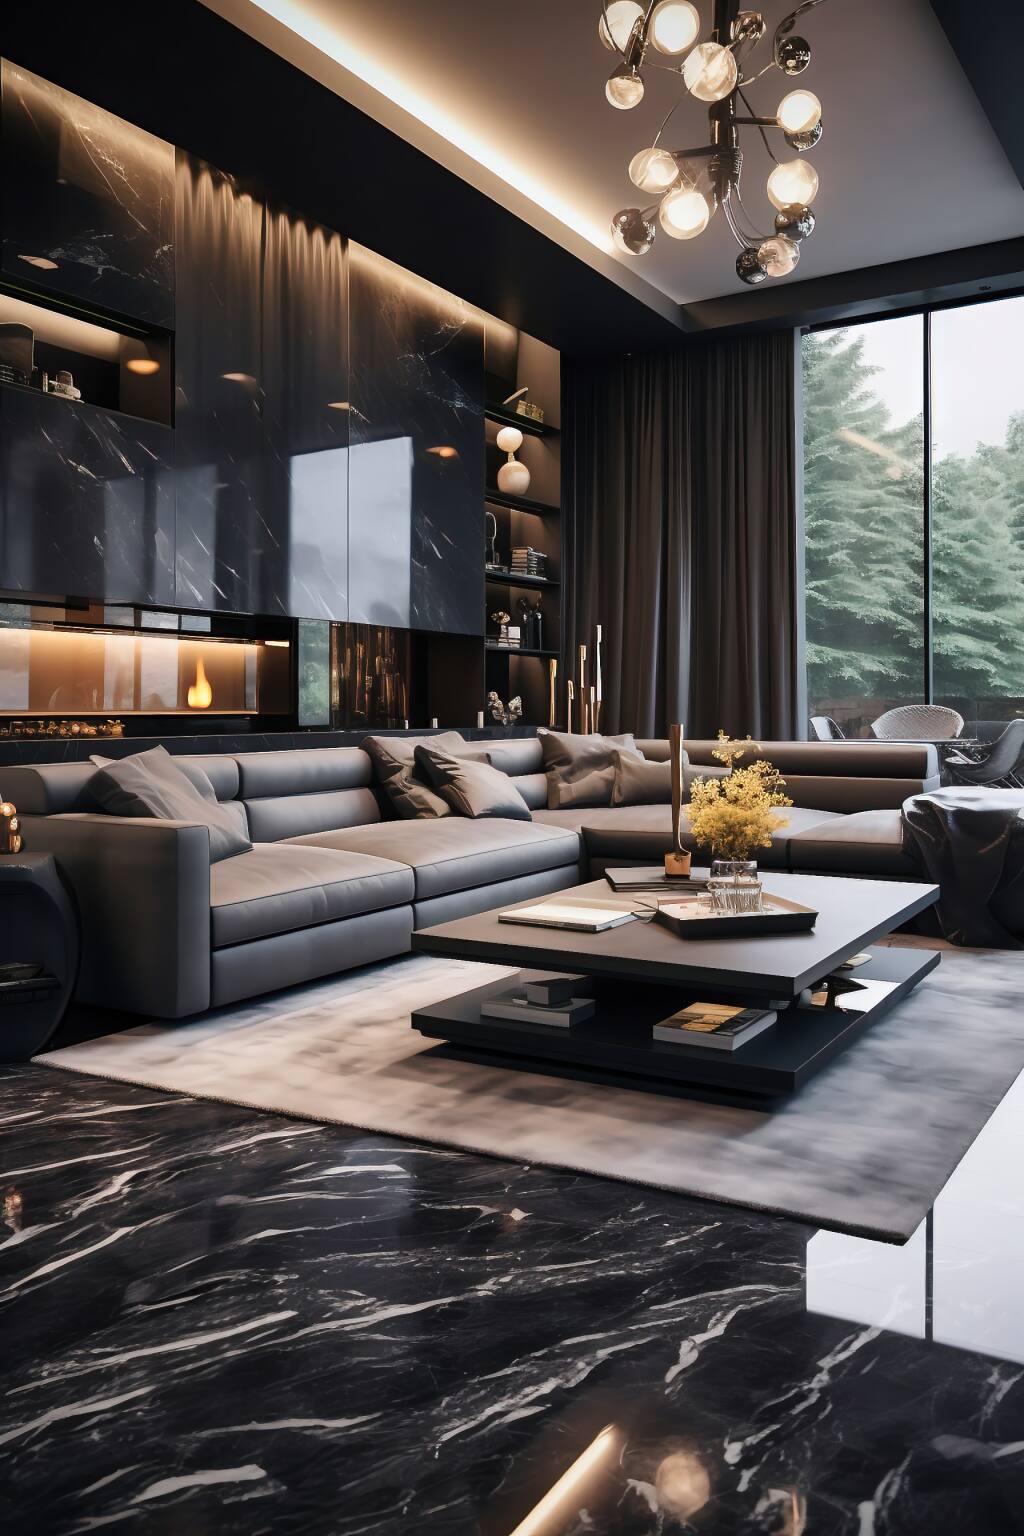 A Sophisticated Black And Grey Living Room Boasting High-End Furnishings, Statement Lighting, And Sleek Marble Flooring For A Touch Of Grandeur.